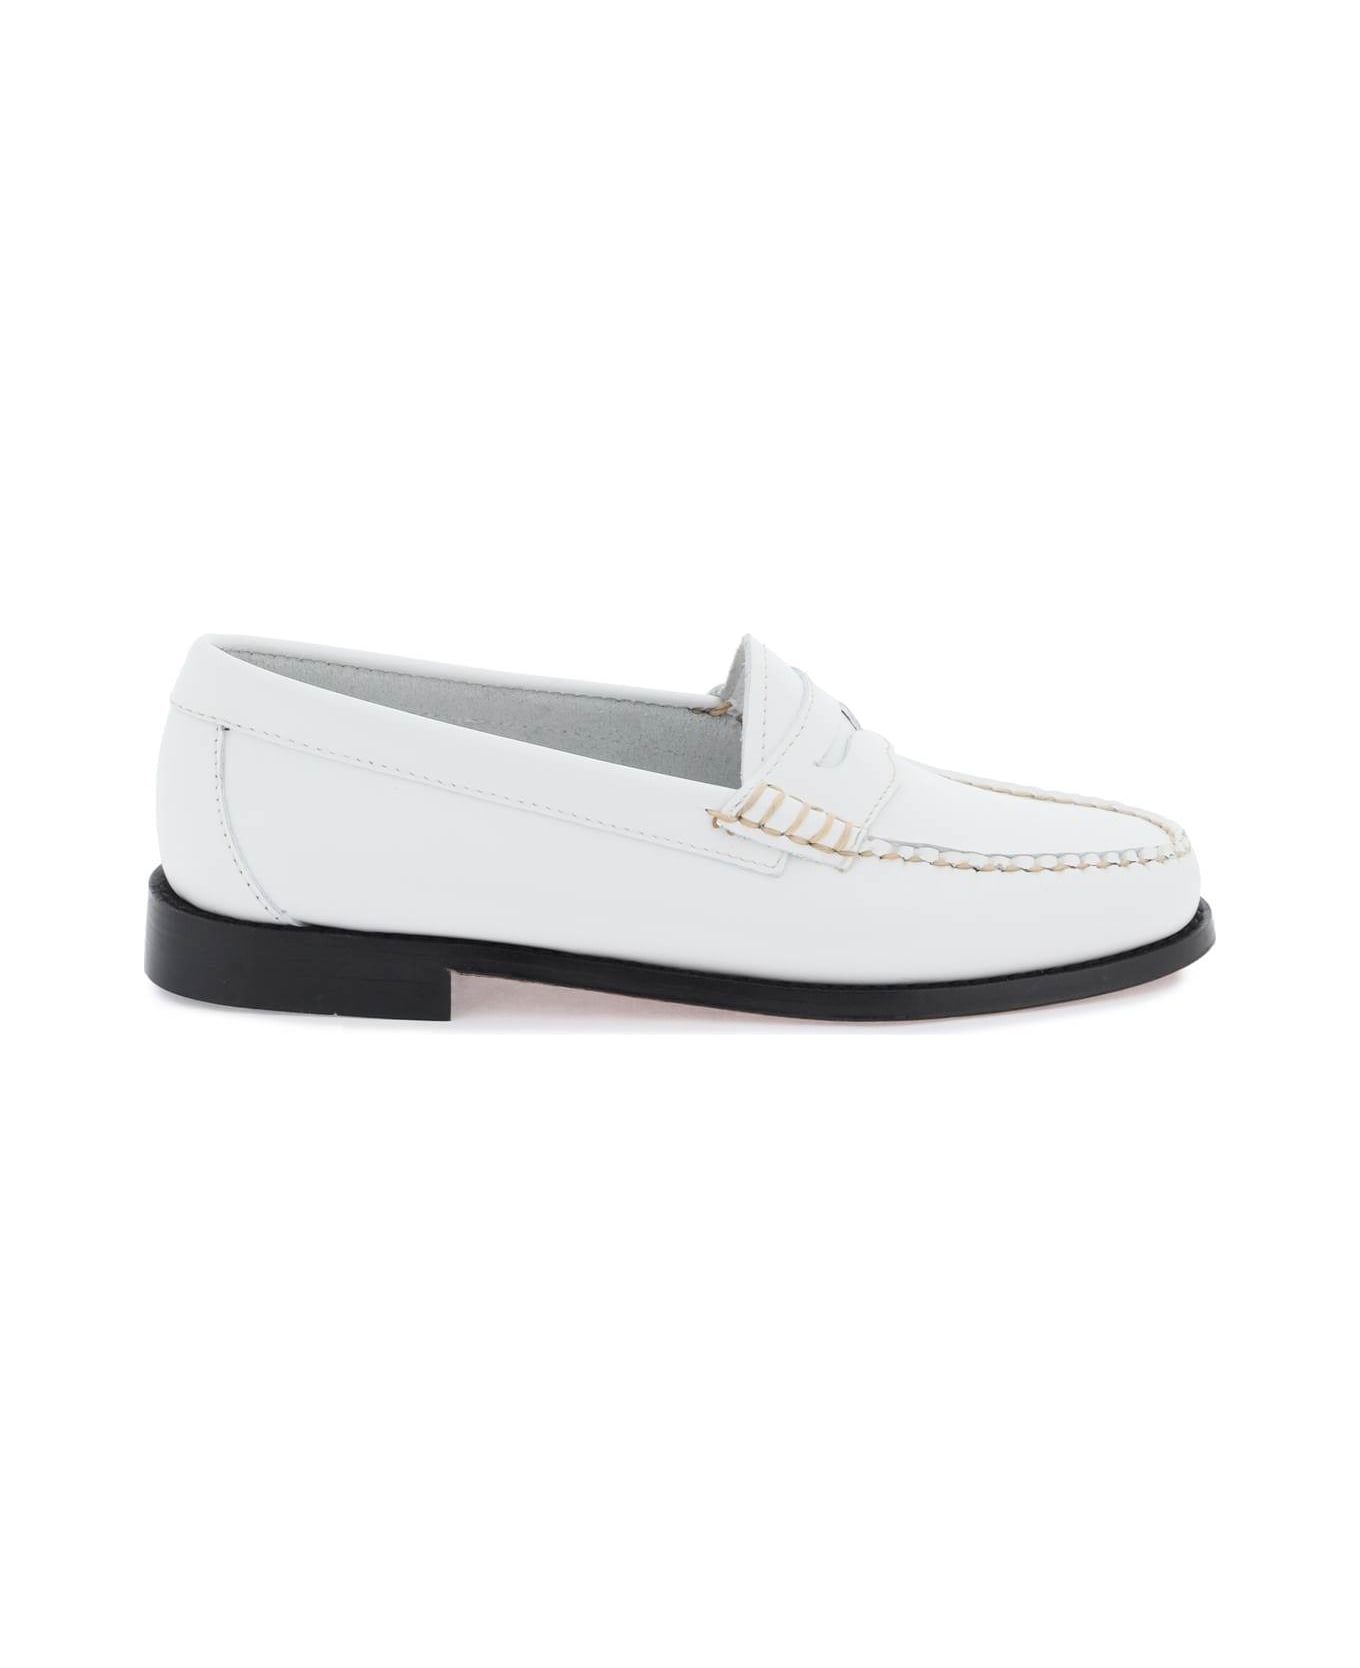 G.H.Bass & Co. Weejuns Penny Loafers - WHITE (White)